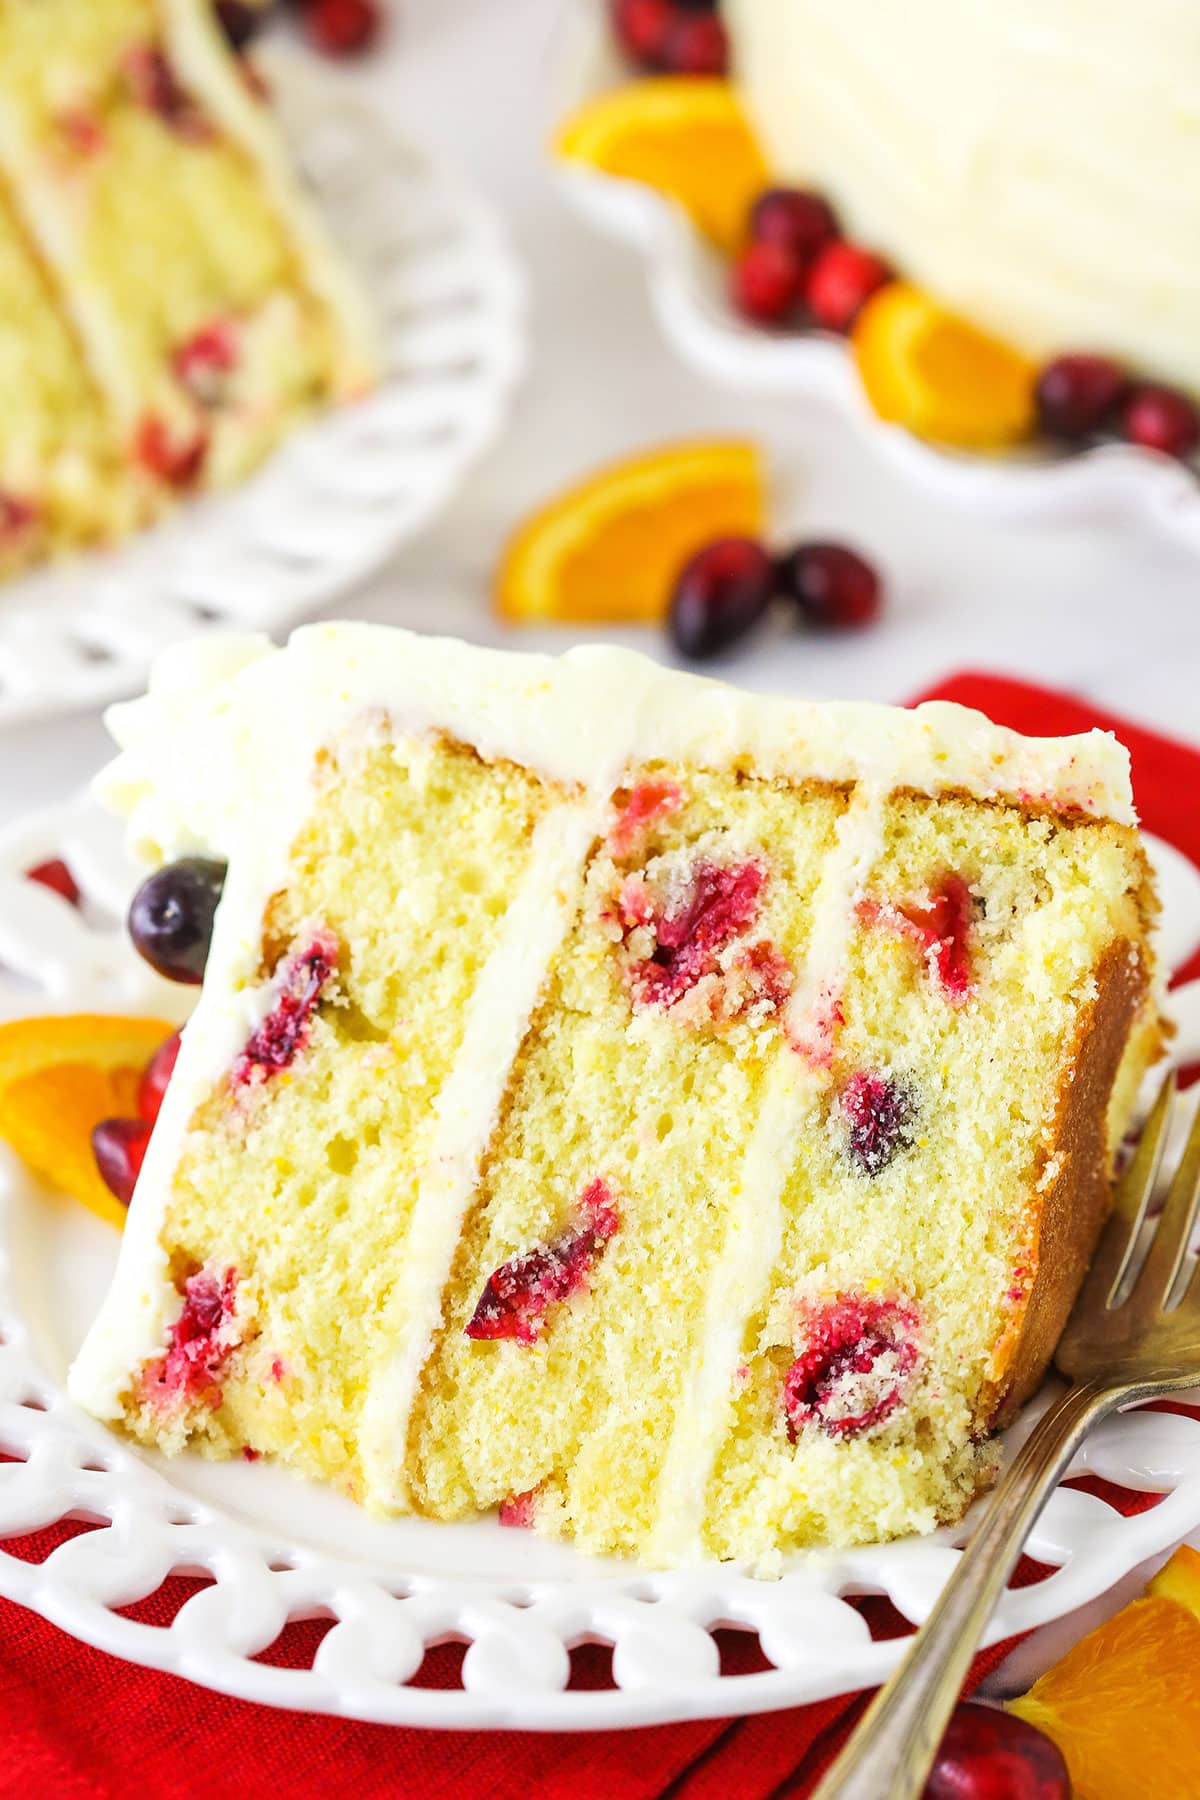 Overhead view of a slice of Cranberry Orange Layer Cake on it's side.